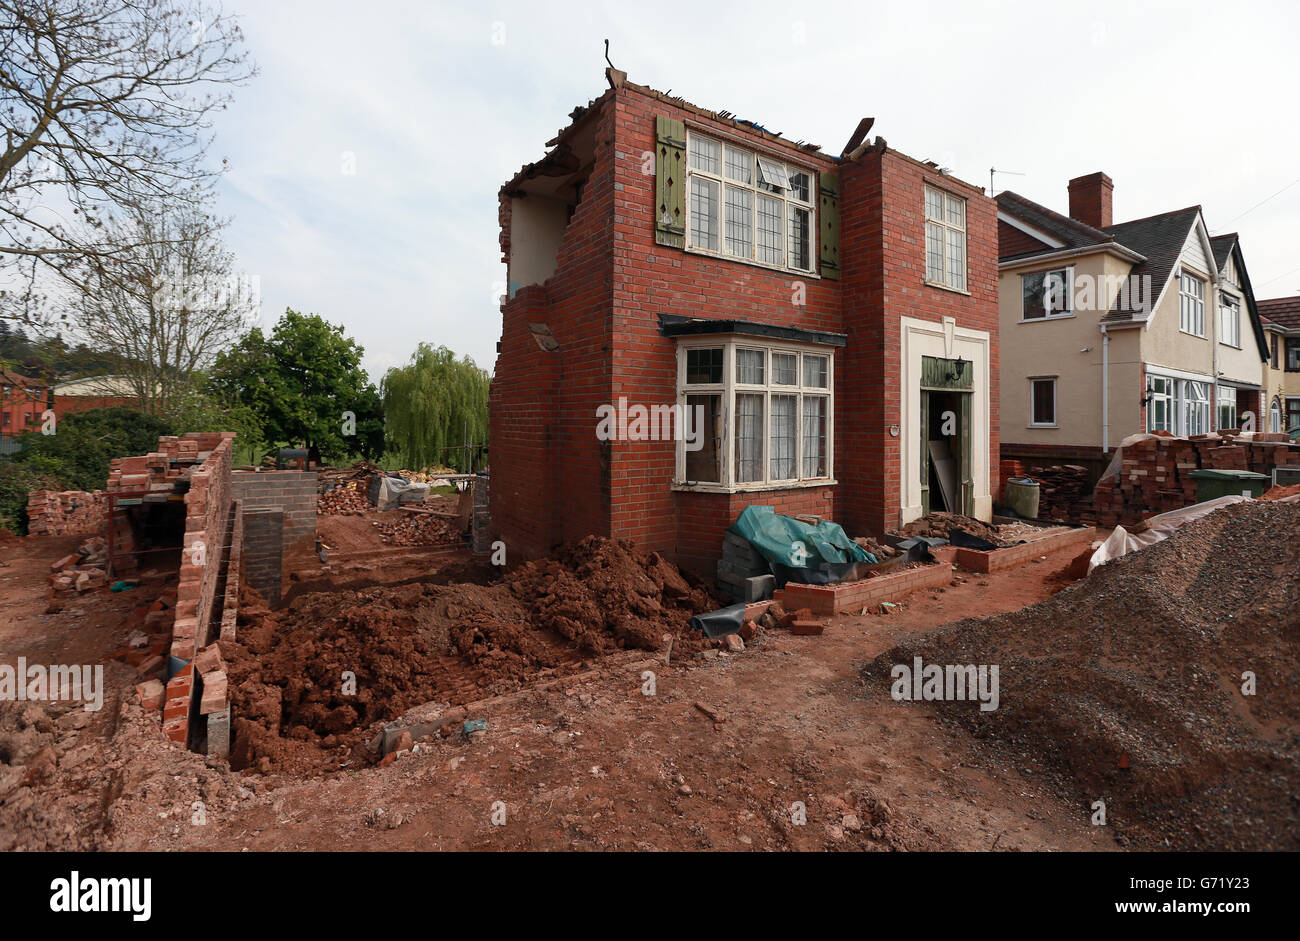 A house belonging to the daughter of Cllr Allah Ditta in the Battenhall area of Worcester city, the council has threatened to demolish the 'eyesore' property belonging to the councillor's daughter after renovation work left it in a dangerous state. Stock Photo